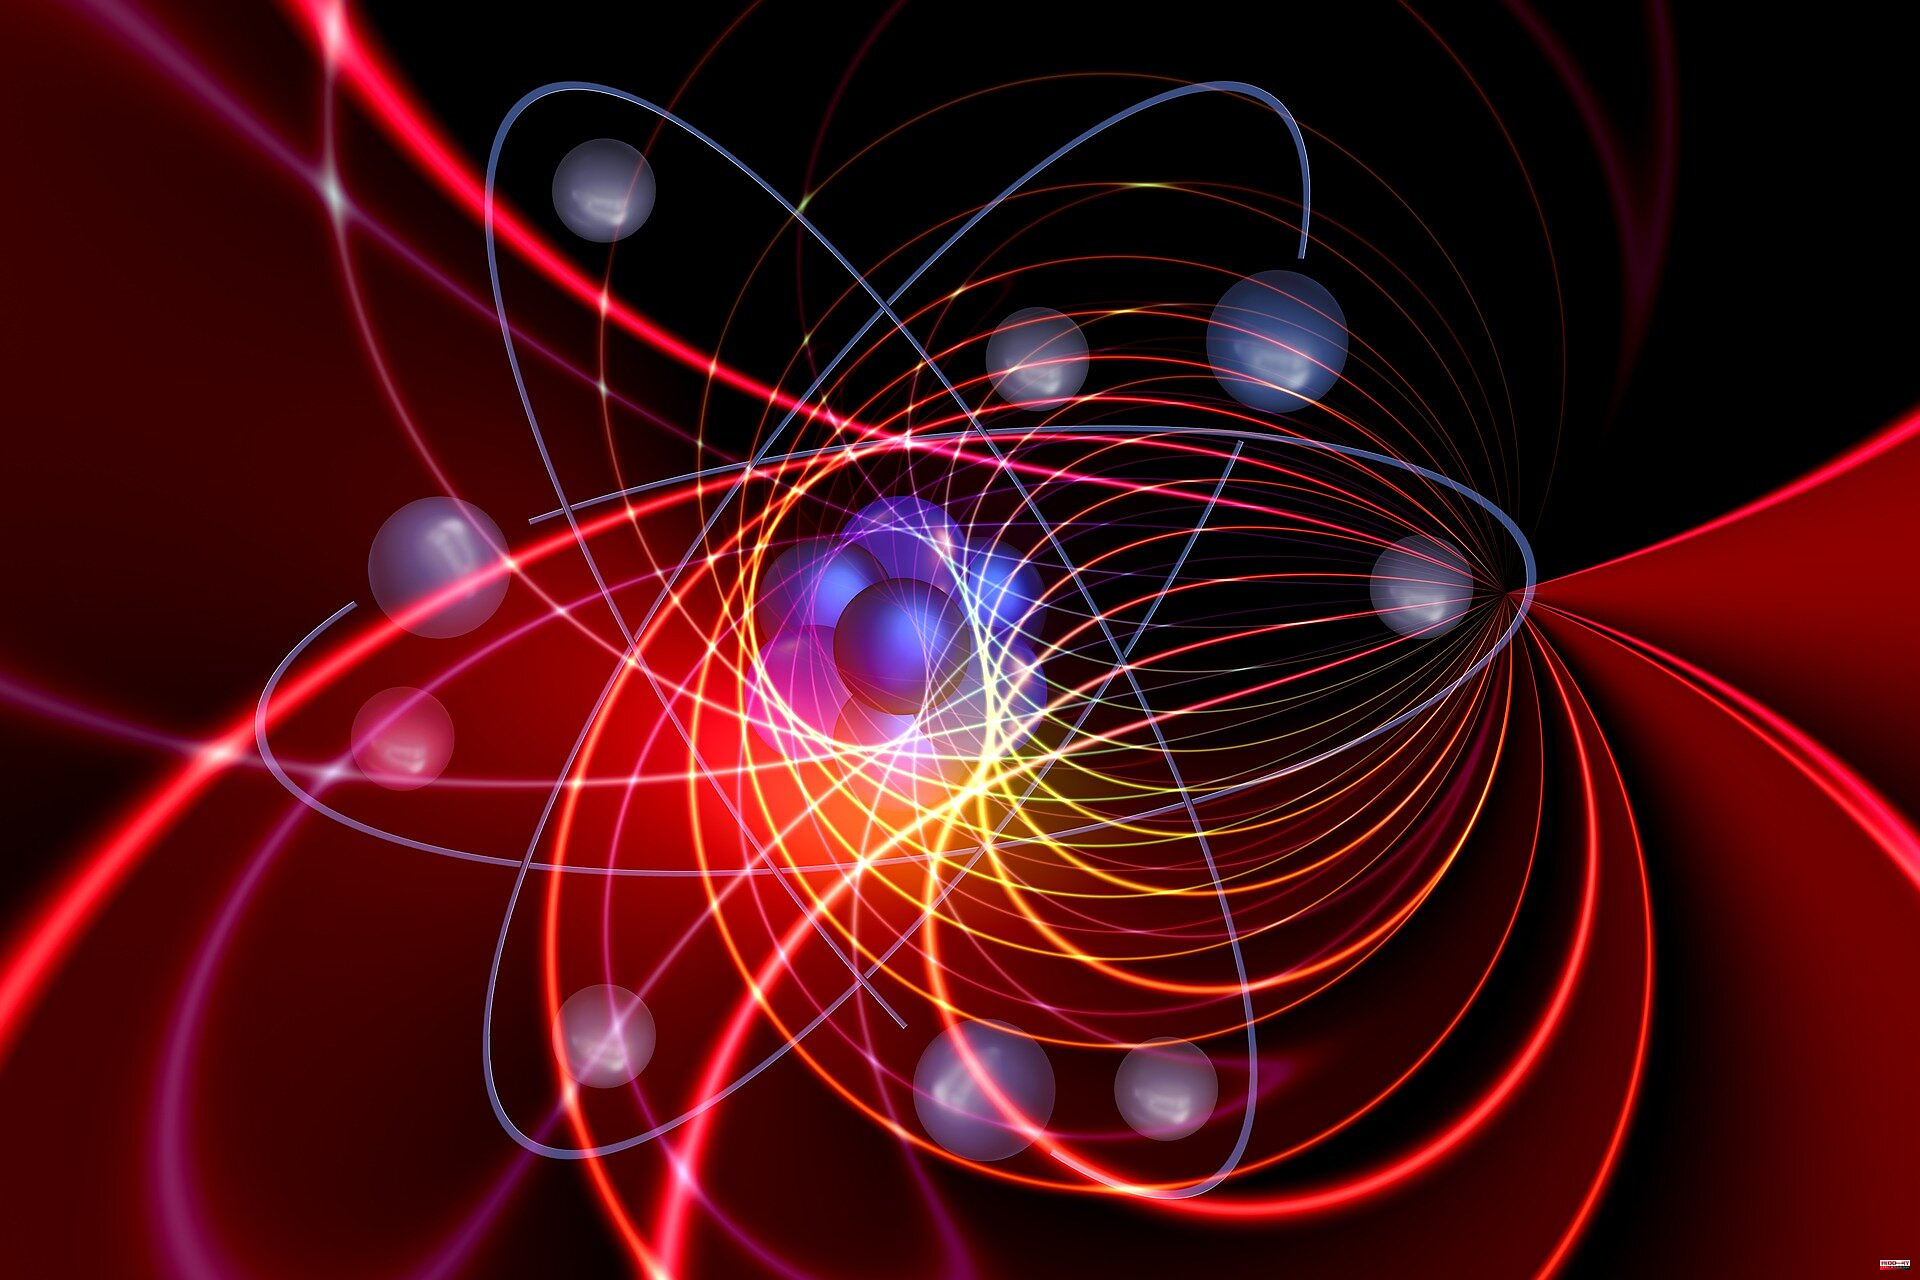 For the first time, physicists can see electron whirlpools.